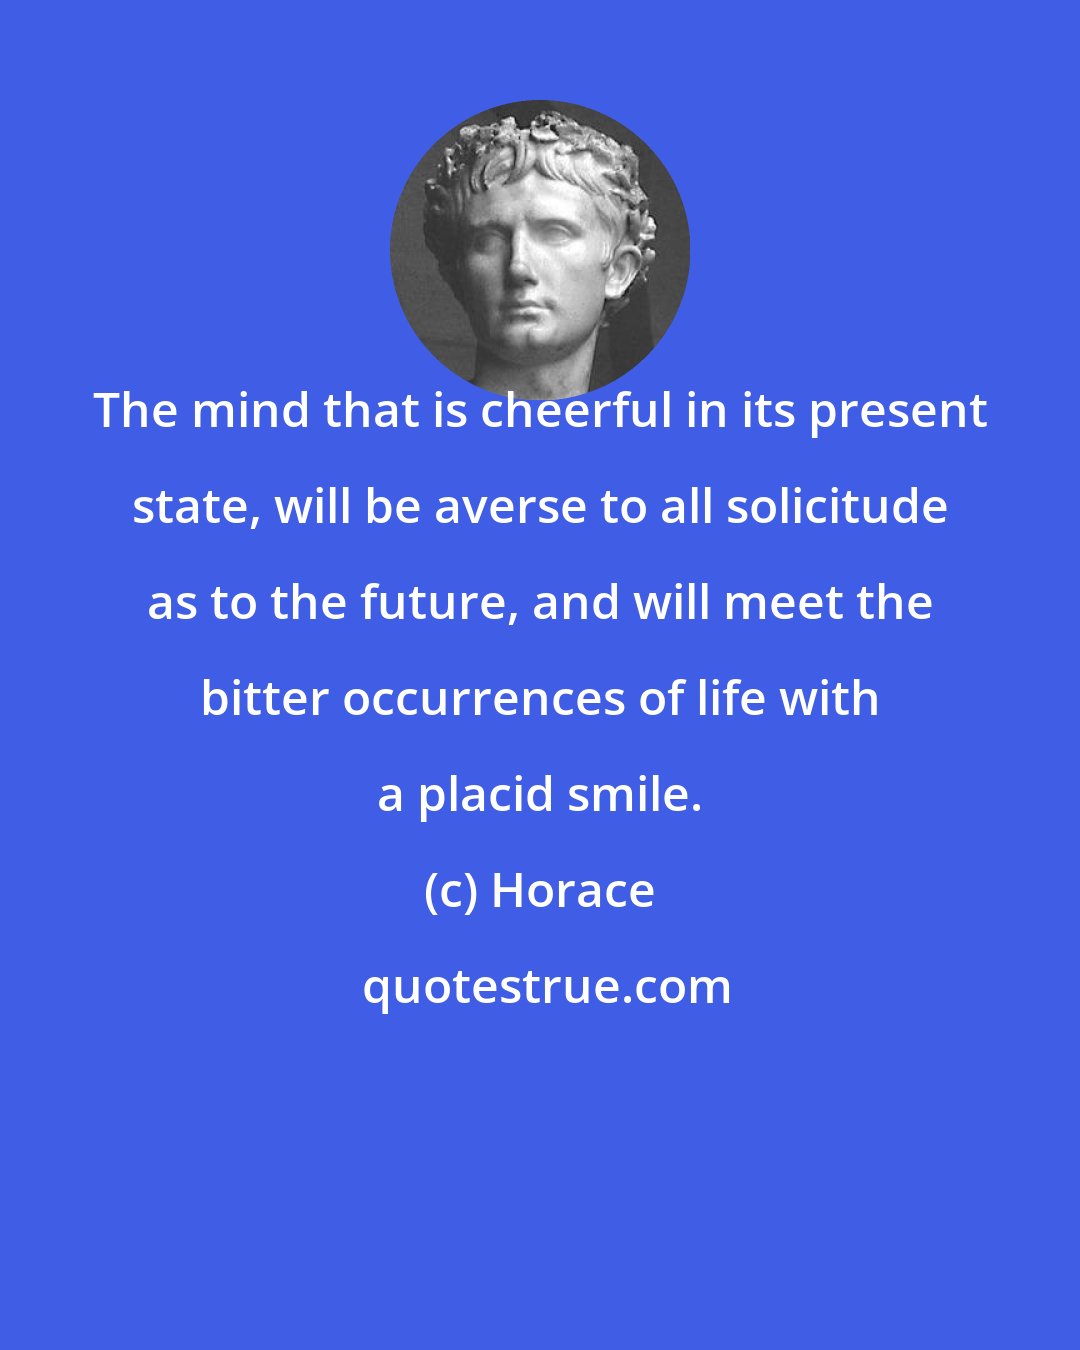 Horace: The mind that is cheerful in its present state, will be averse to all solicitude as to the future, and will meet the bitter occurrences of life with a placid smile.